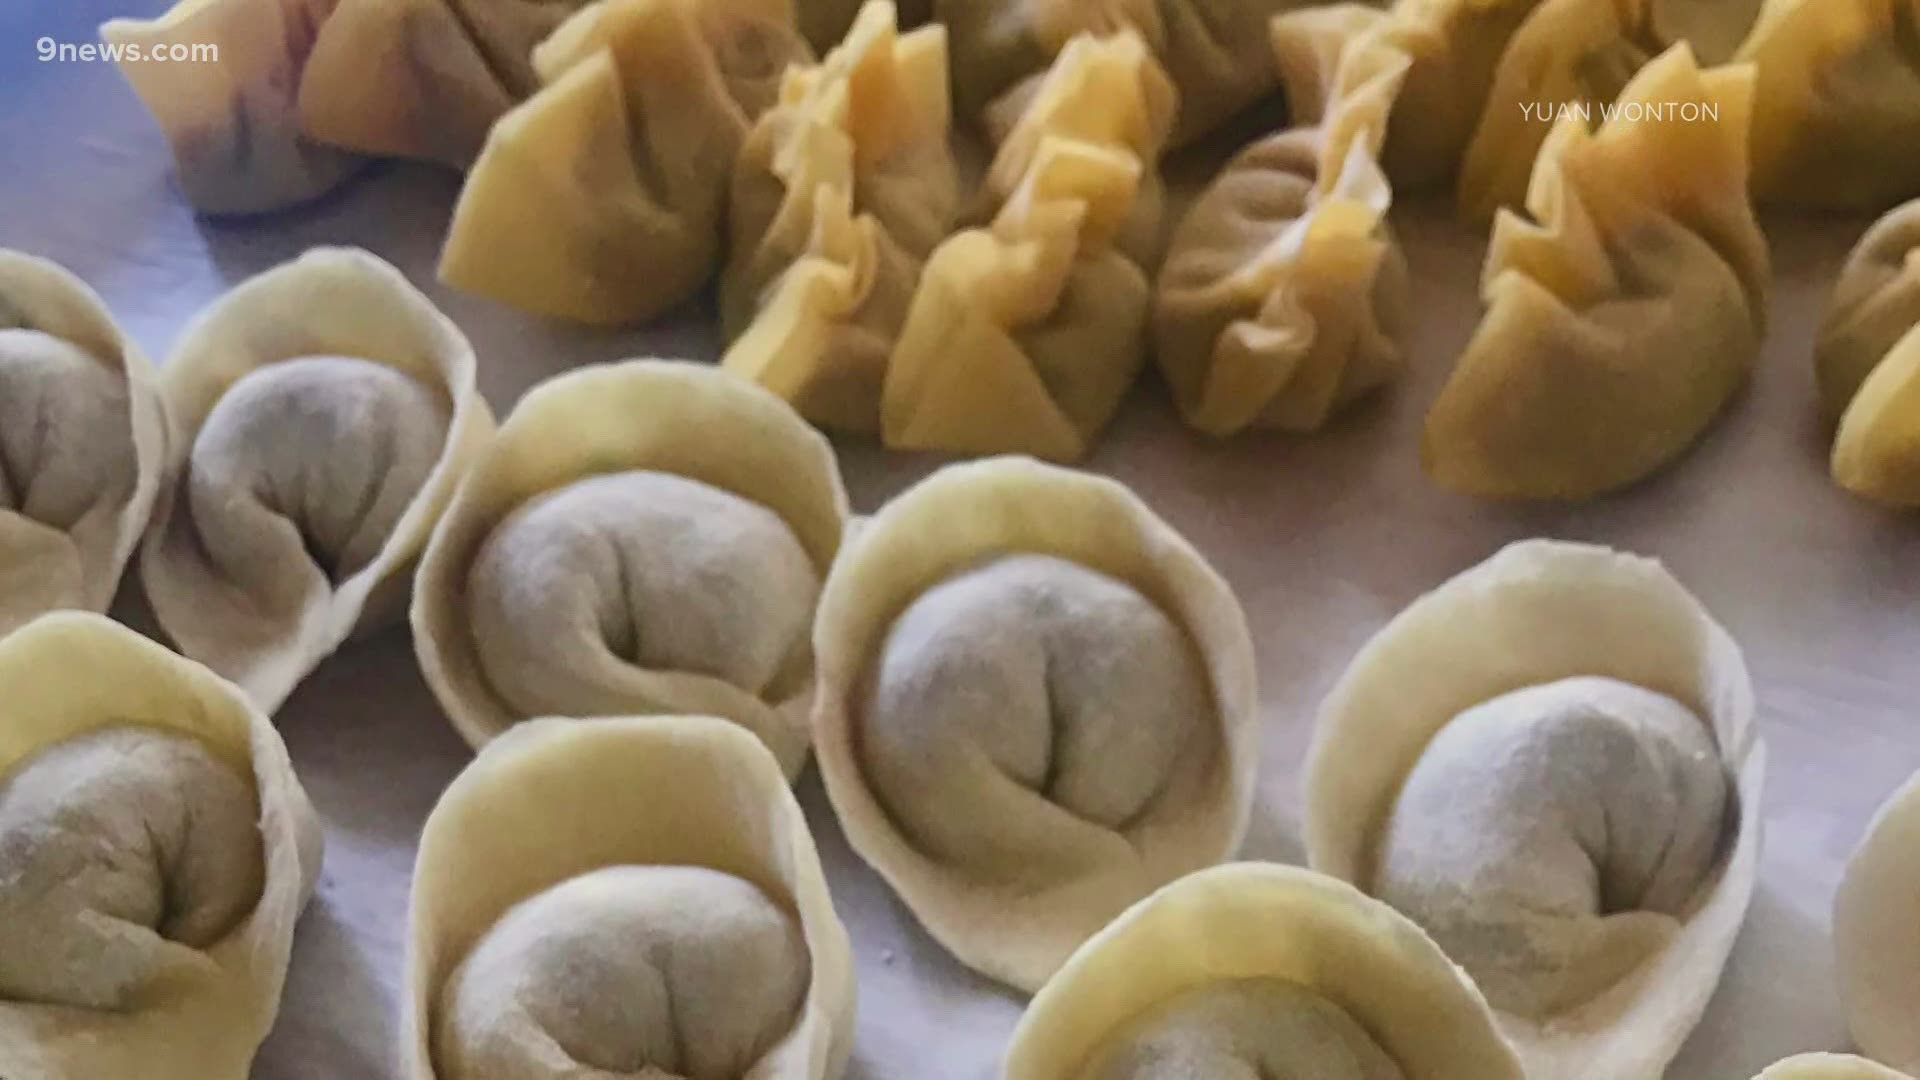 Yuan Wonton specializes in chili wontons and authentic dumplings. Chef Penelope Wong has attracted a cult following on social media since opening last August.